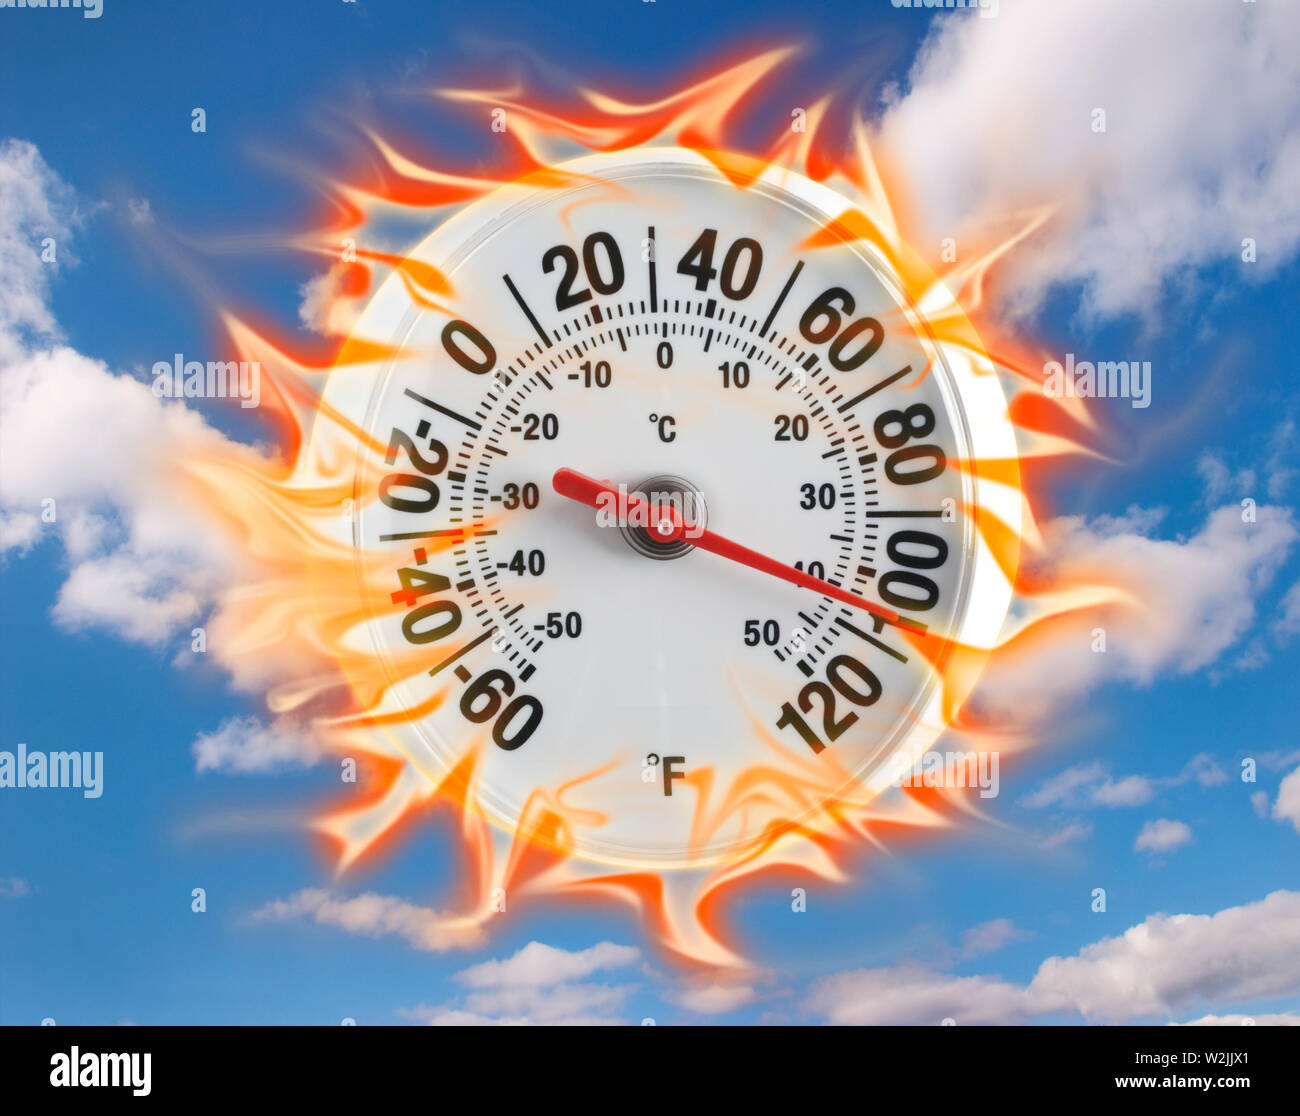 Outdoor thermometer indicating 107 degrees Fahrenheit or 40 Celsius, with dial on fire Stock Photo